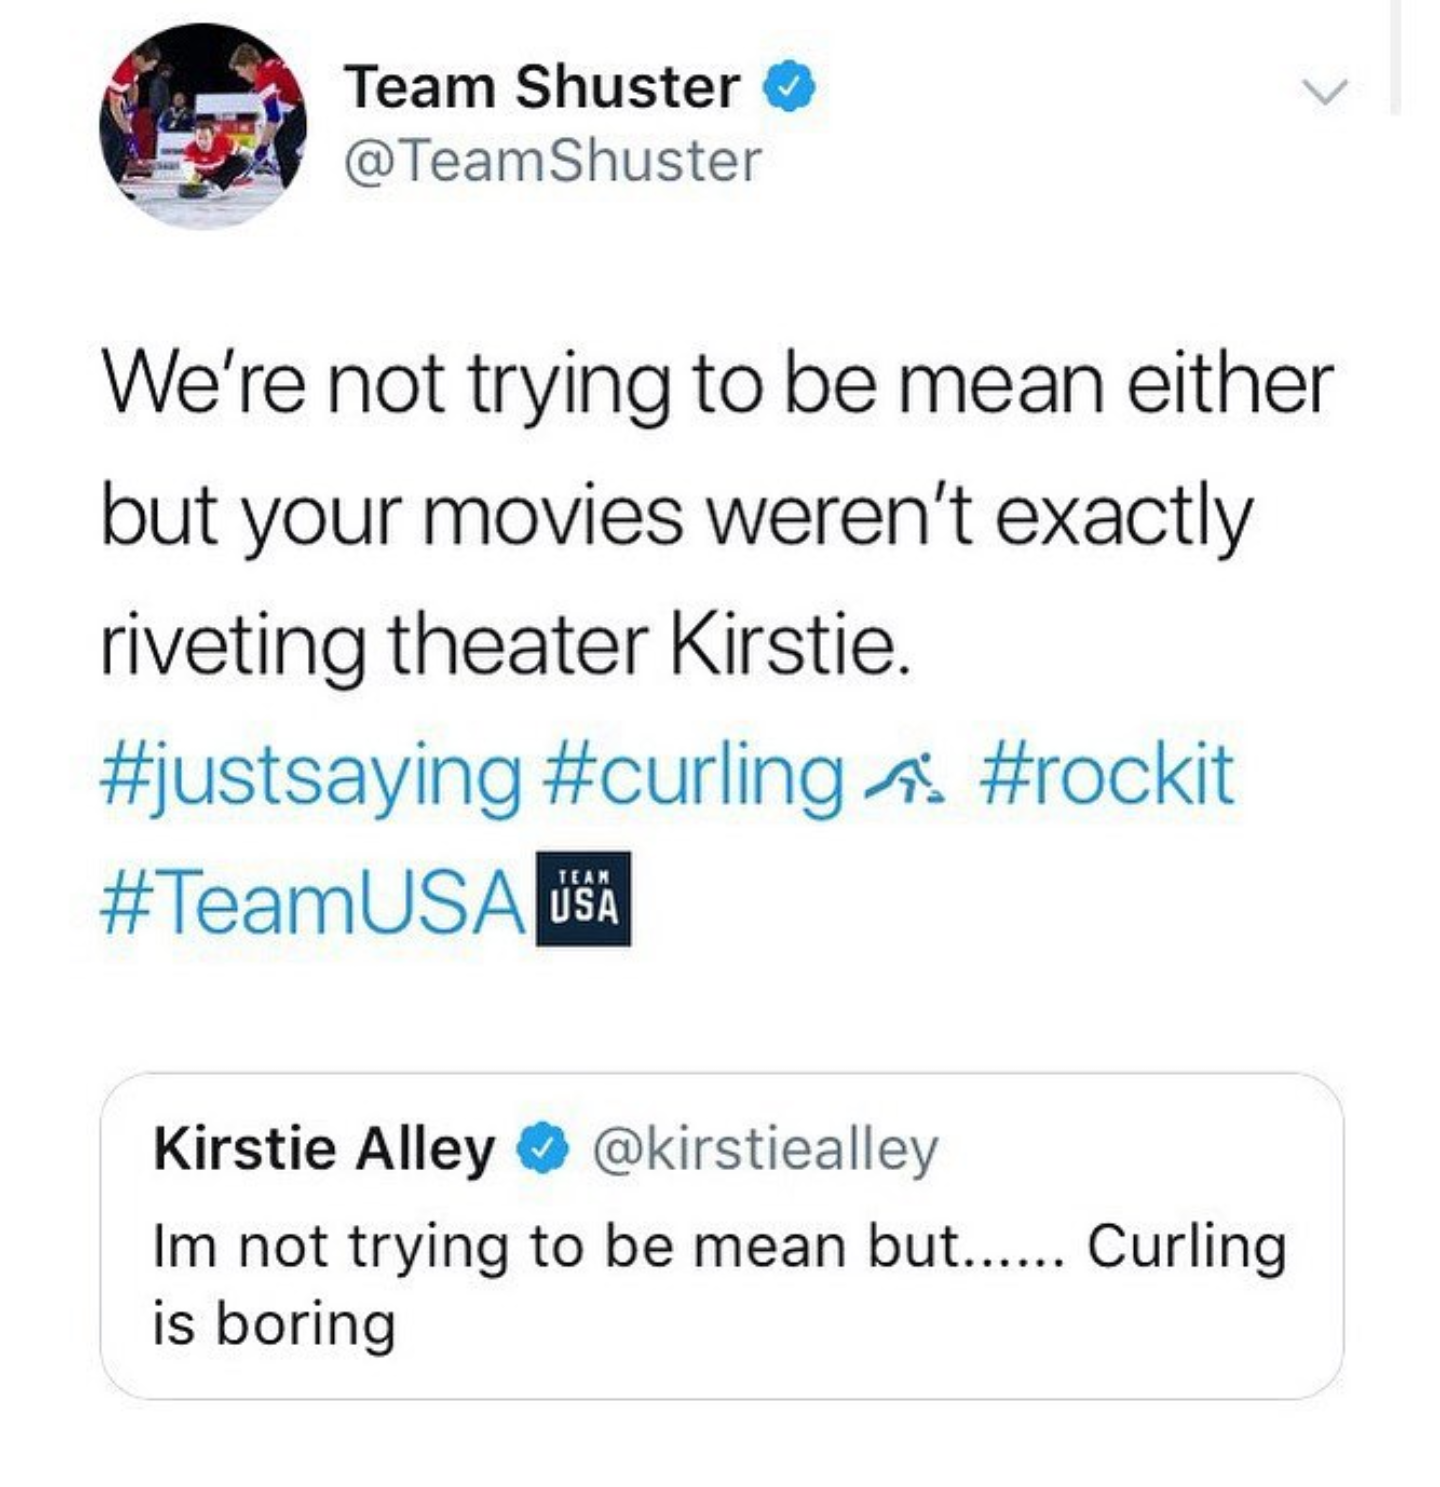 high expectations funny - Team Shuster We're not trying to be mean either but your movies weren't exactly riveting theater Kirstie. Usa Kirstie Alley Im not trying to be mean but...... Curling is boring